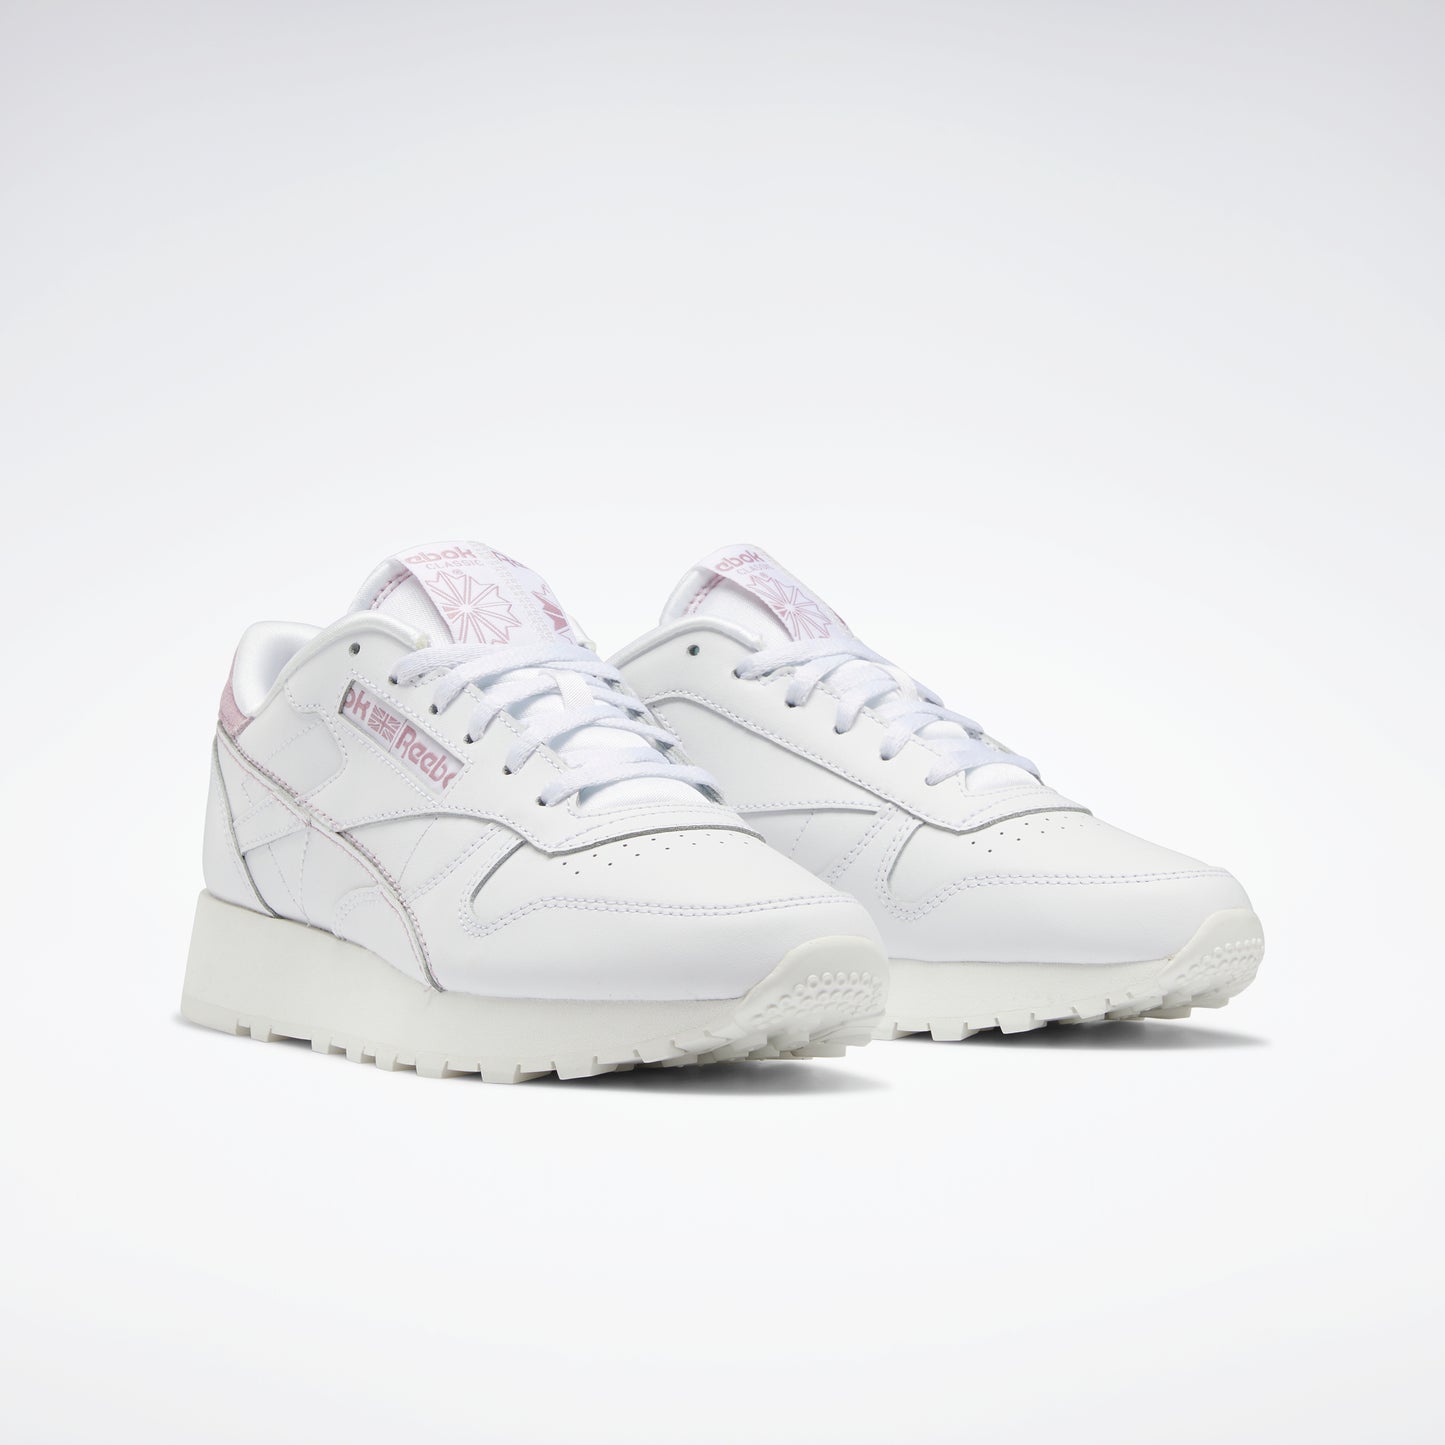 Reebok Footwear Femme Classic Leather Make It Yours Chaussures Ftwwht/Chalk/Inflil